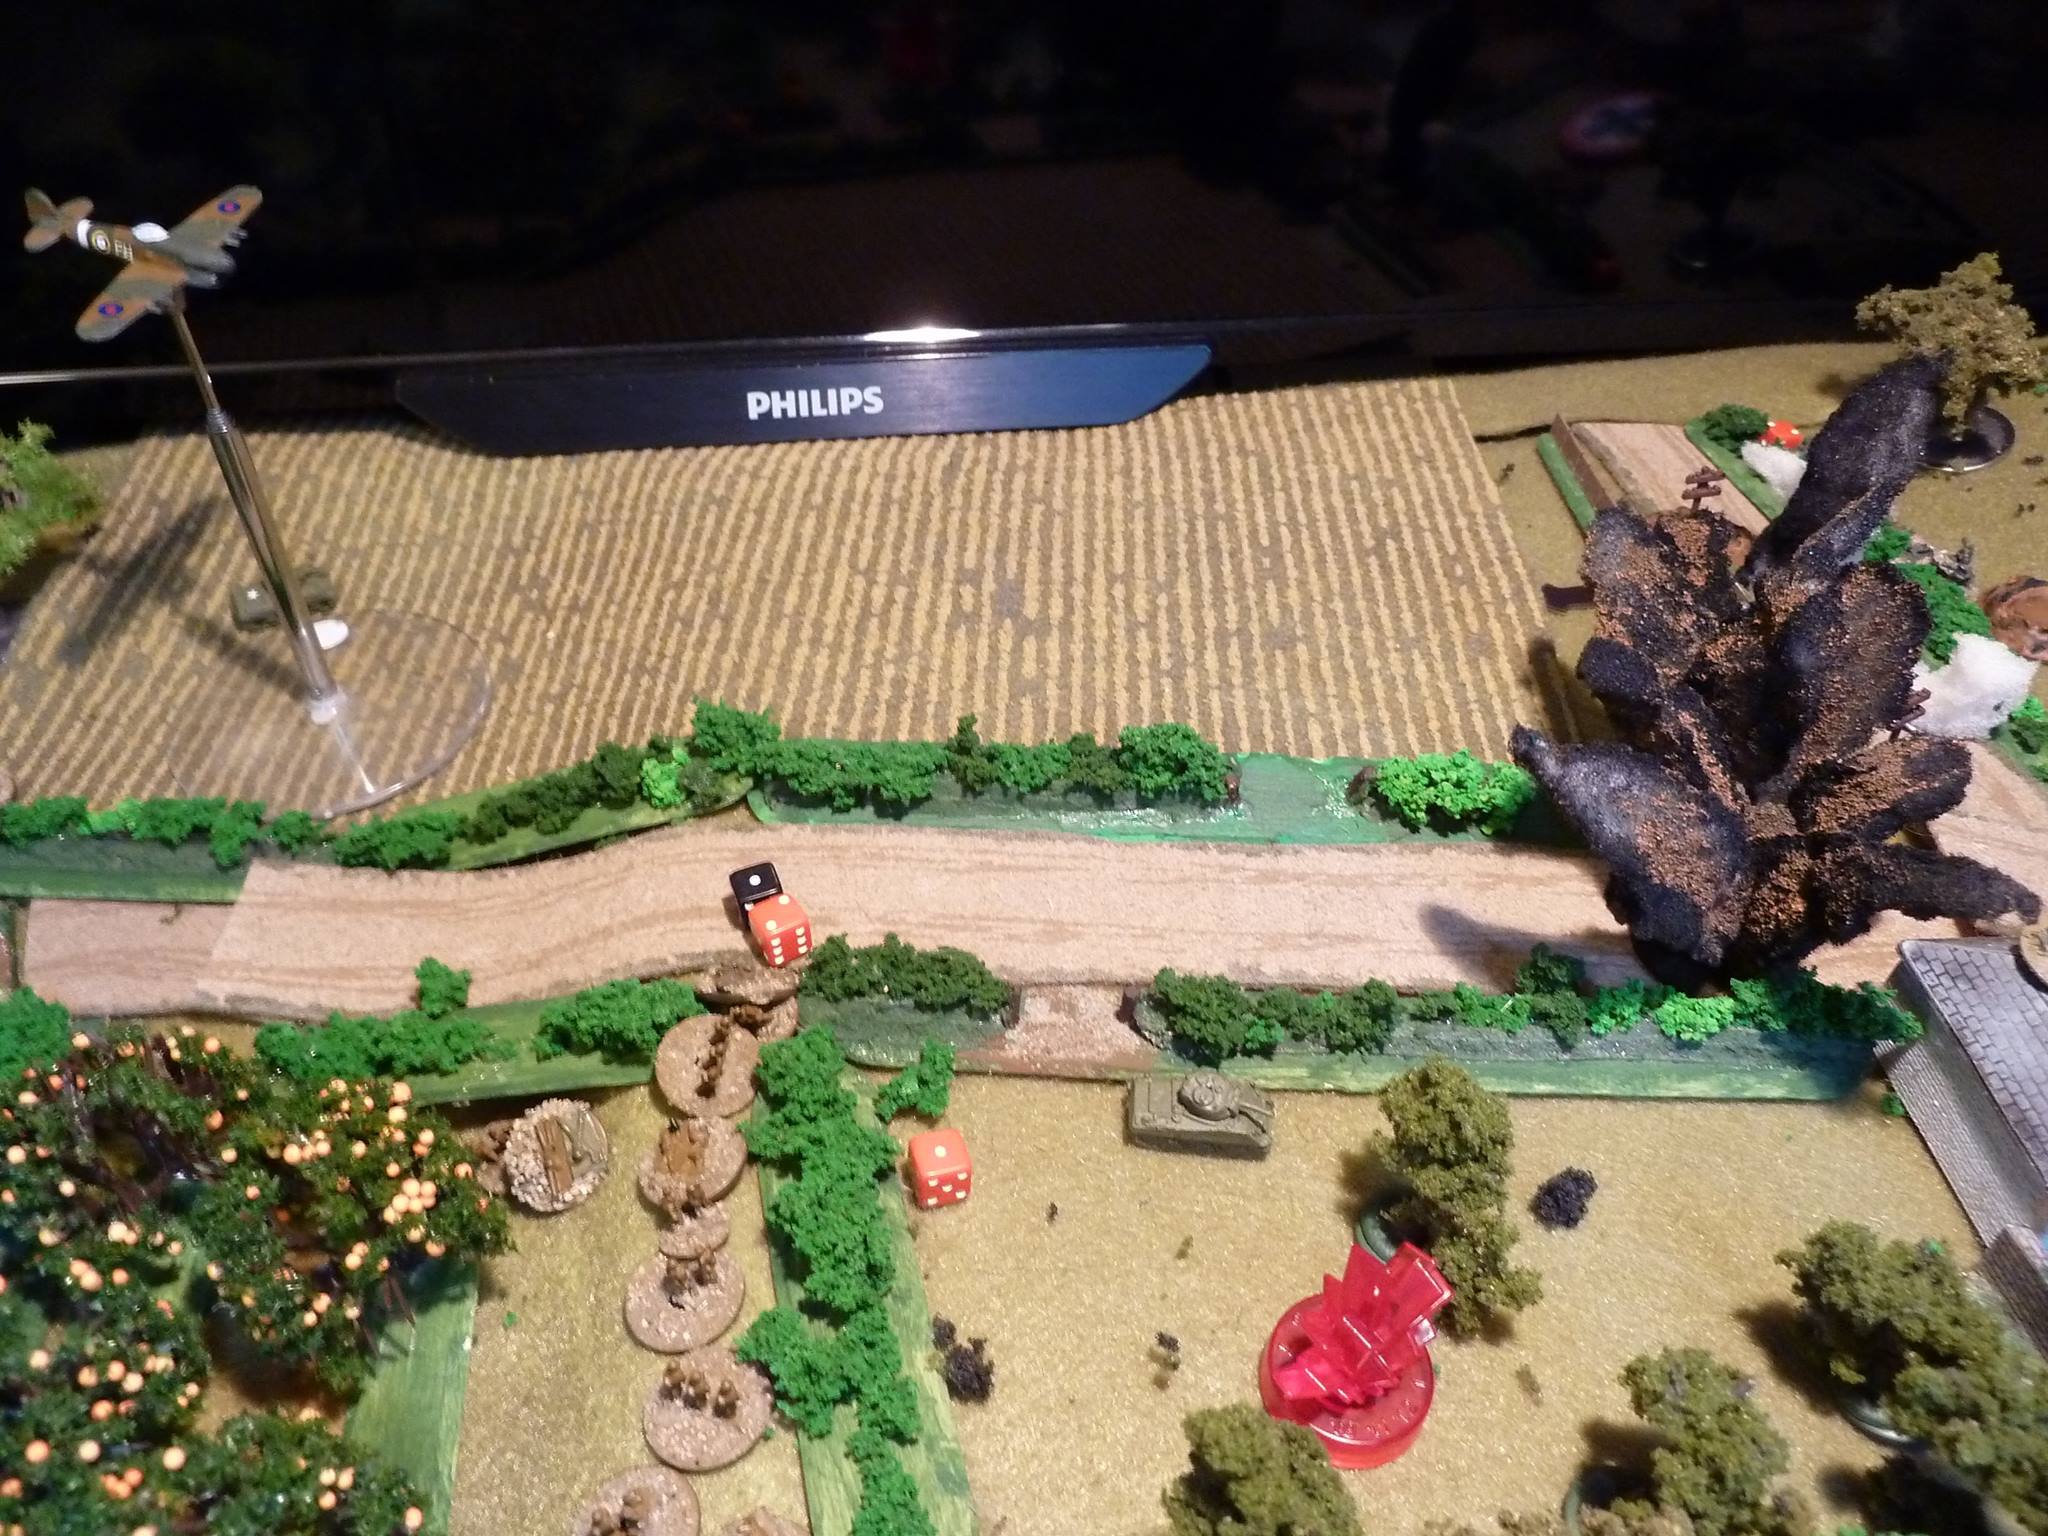  The Canadians in the field flee across the hedge and the road. They take fire from the Germans in the barn and the remains manage to get into the orchard.&nbsp;  A Sherman moves forward toward the barn and a shot from a 'faust misses.  Luckily, the 